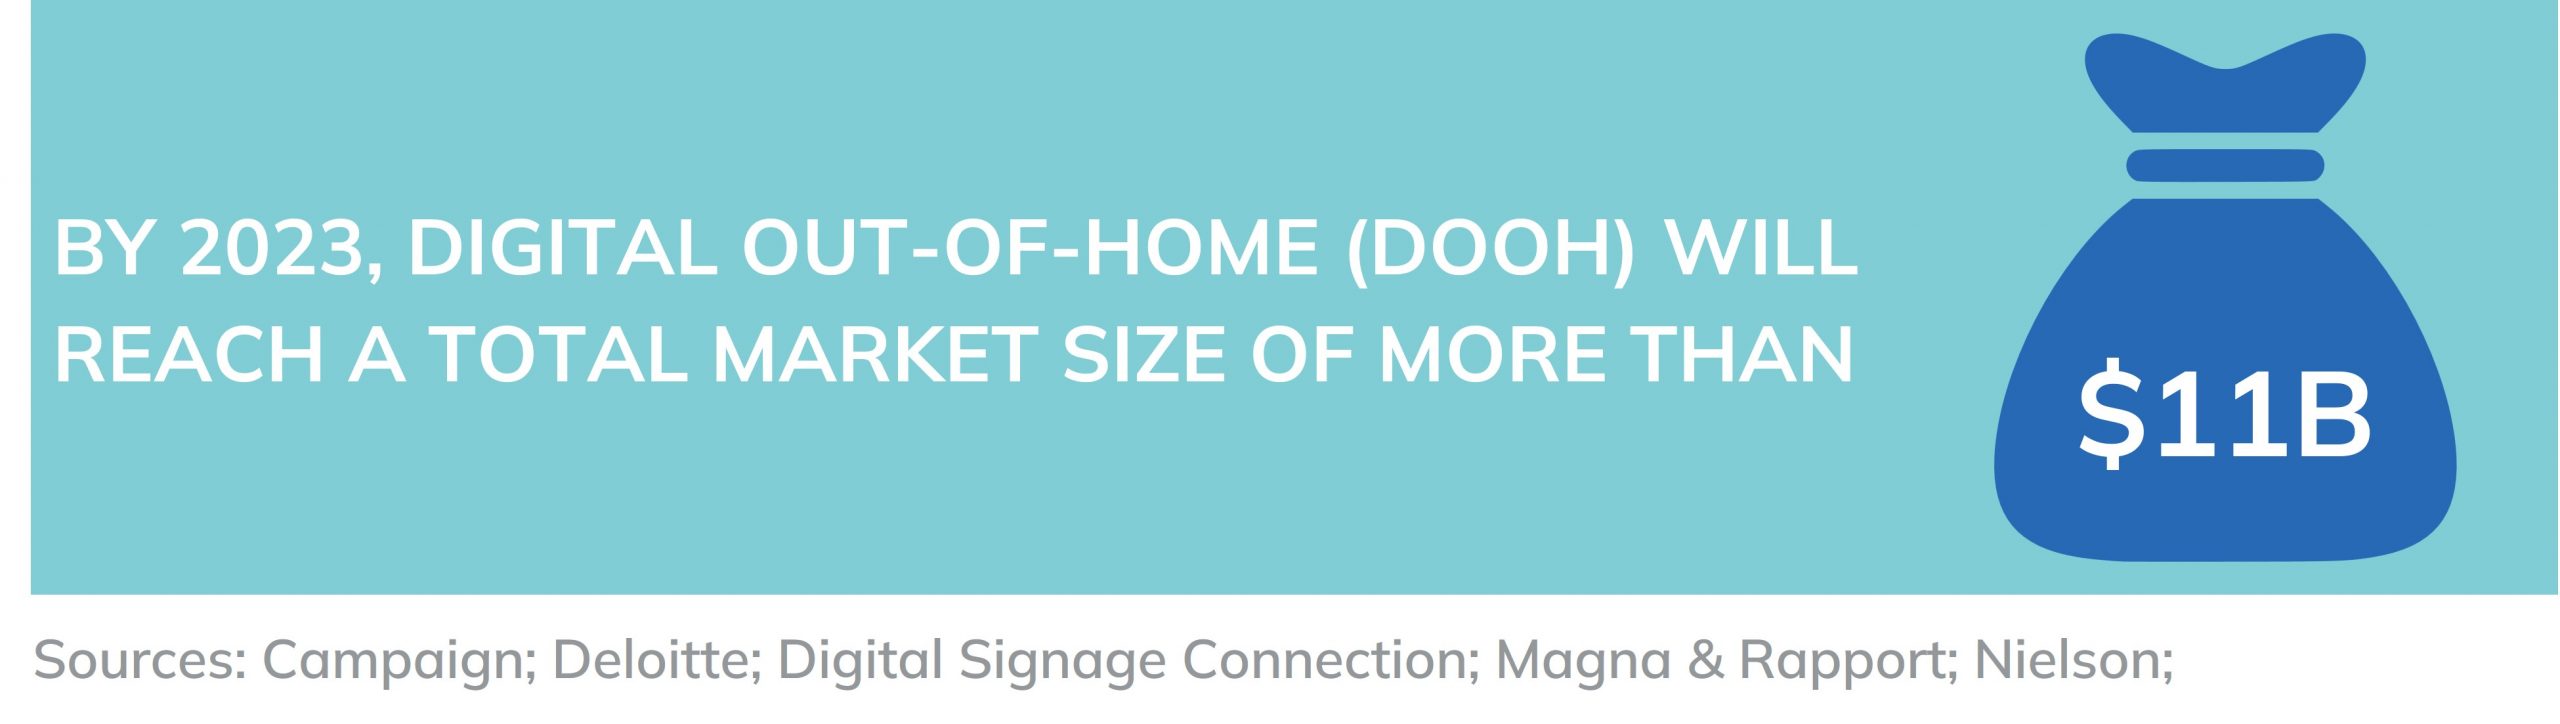 Project DOOH Market size by 2023